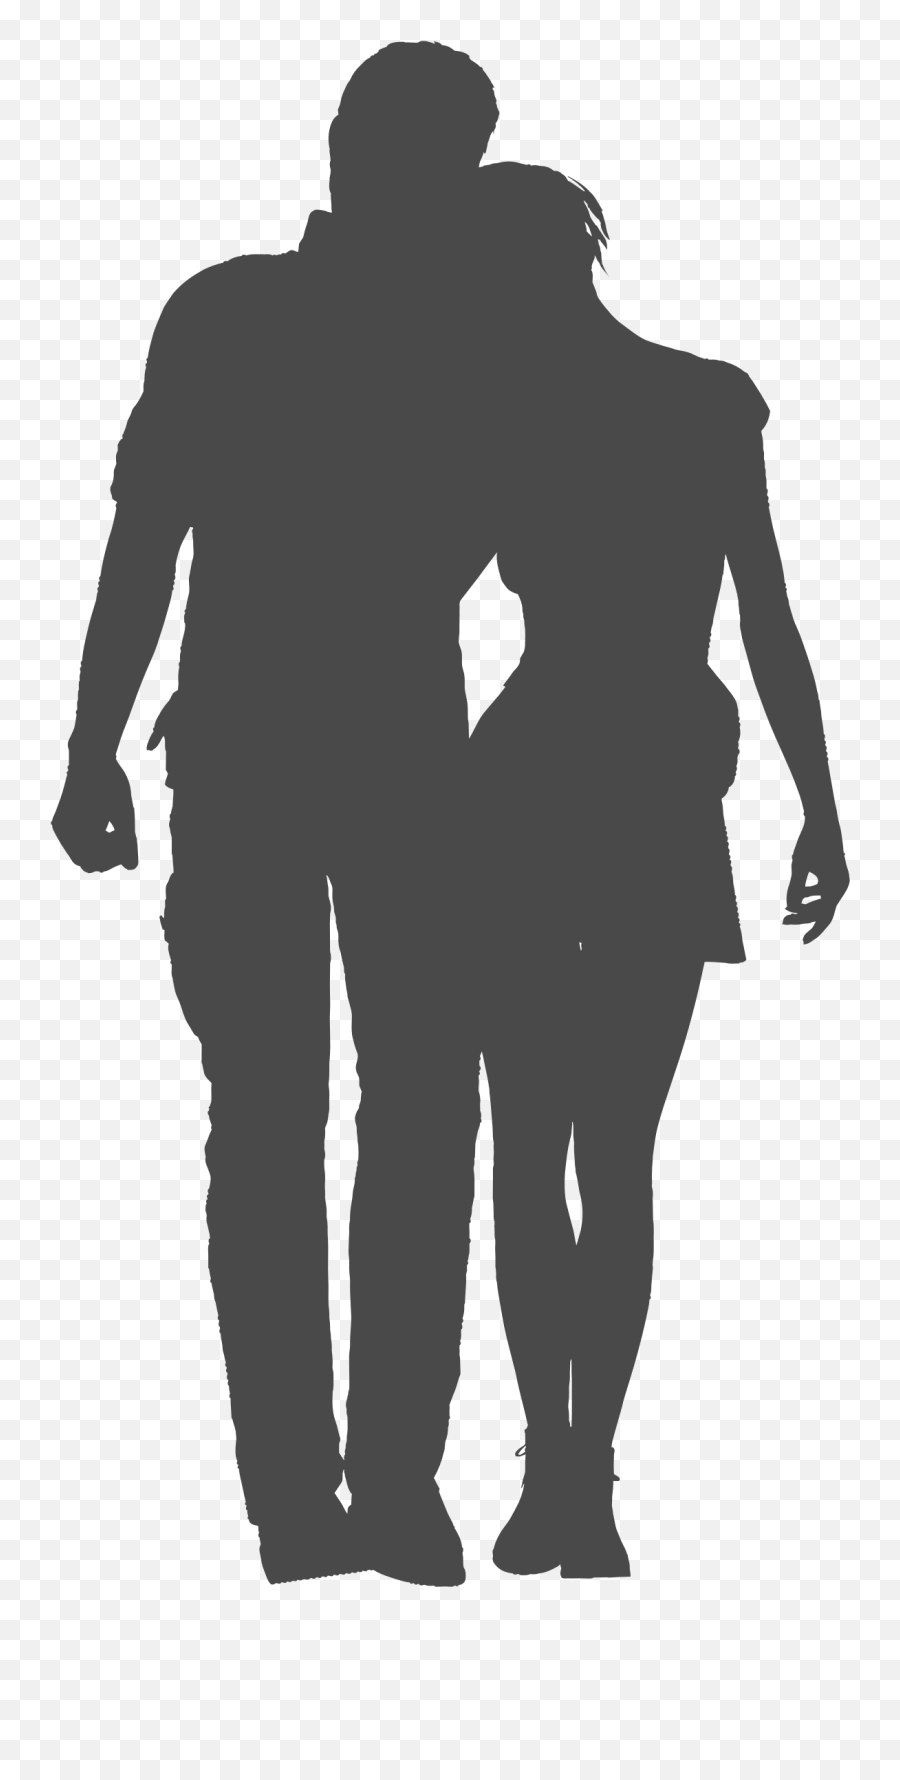 Pin By Varietips On Instagram Couple Silhouette Creative Emoji,Person Silhouette Transparent